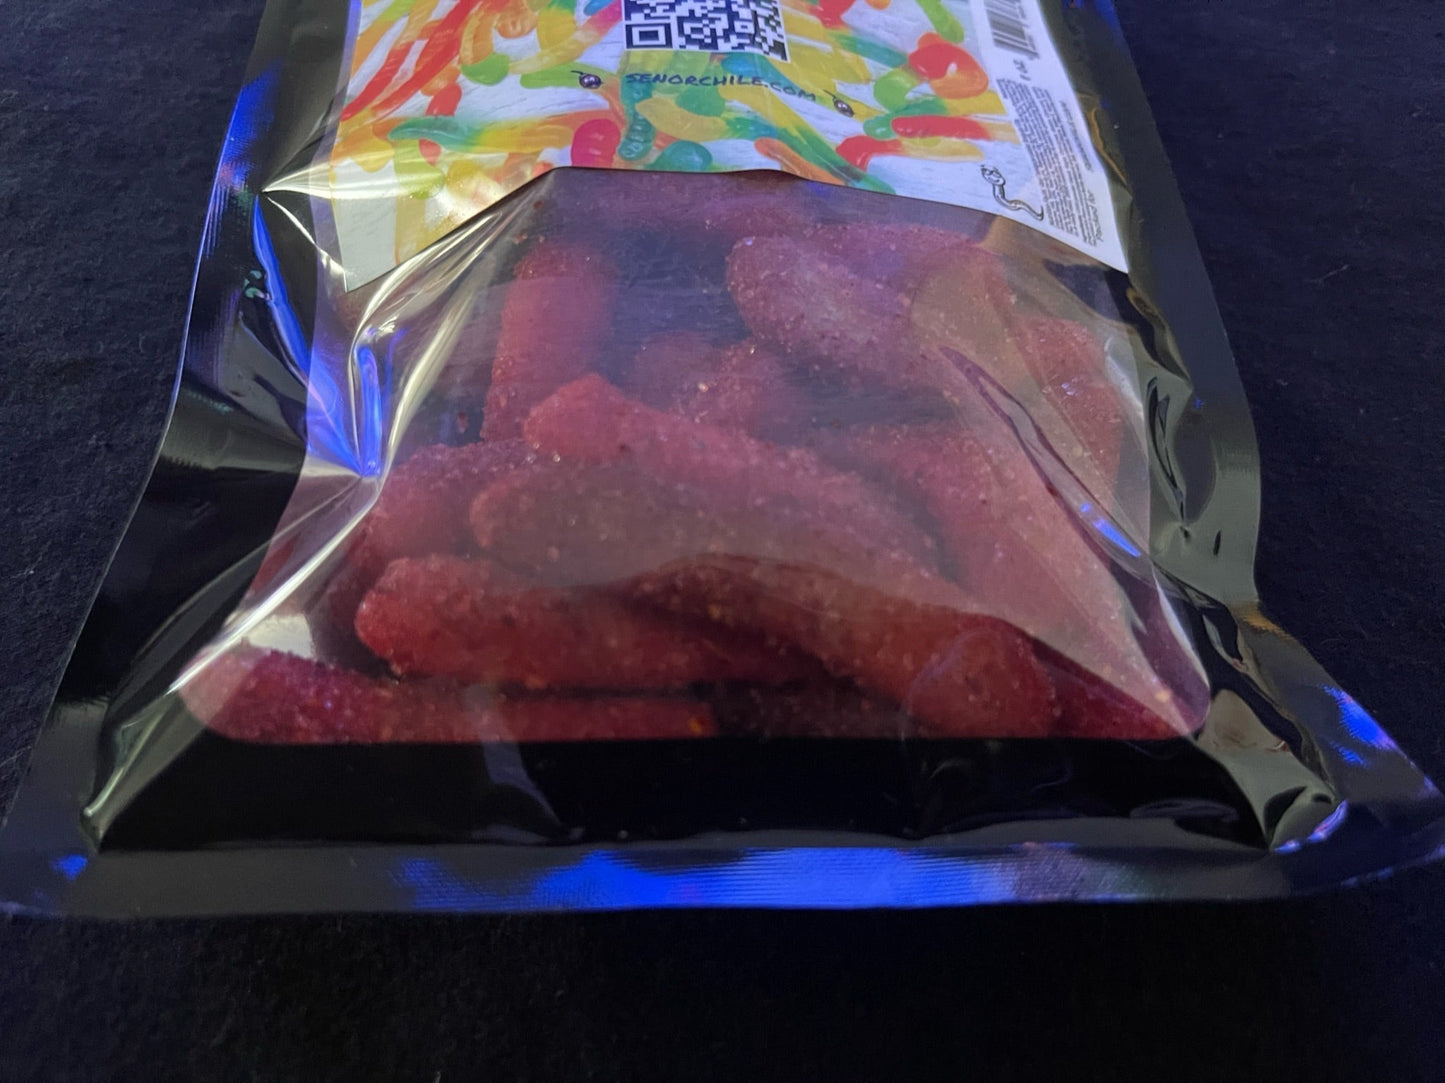 The Best Chamoy Worms